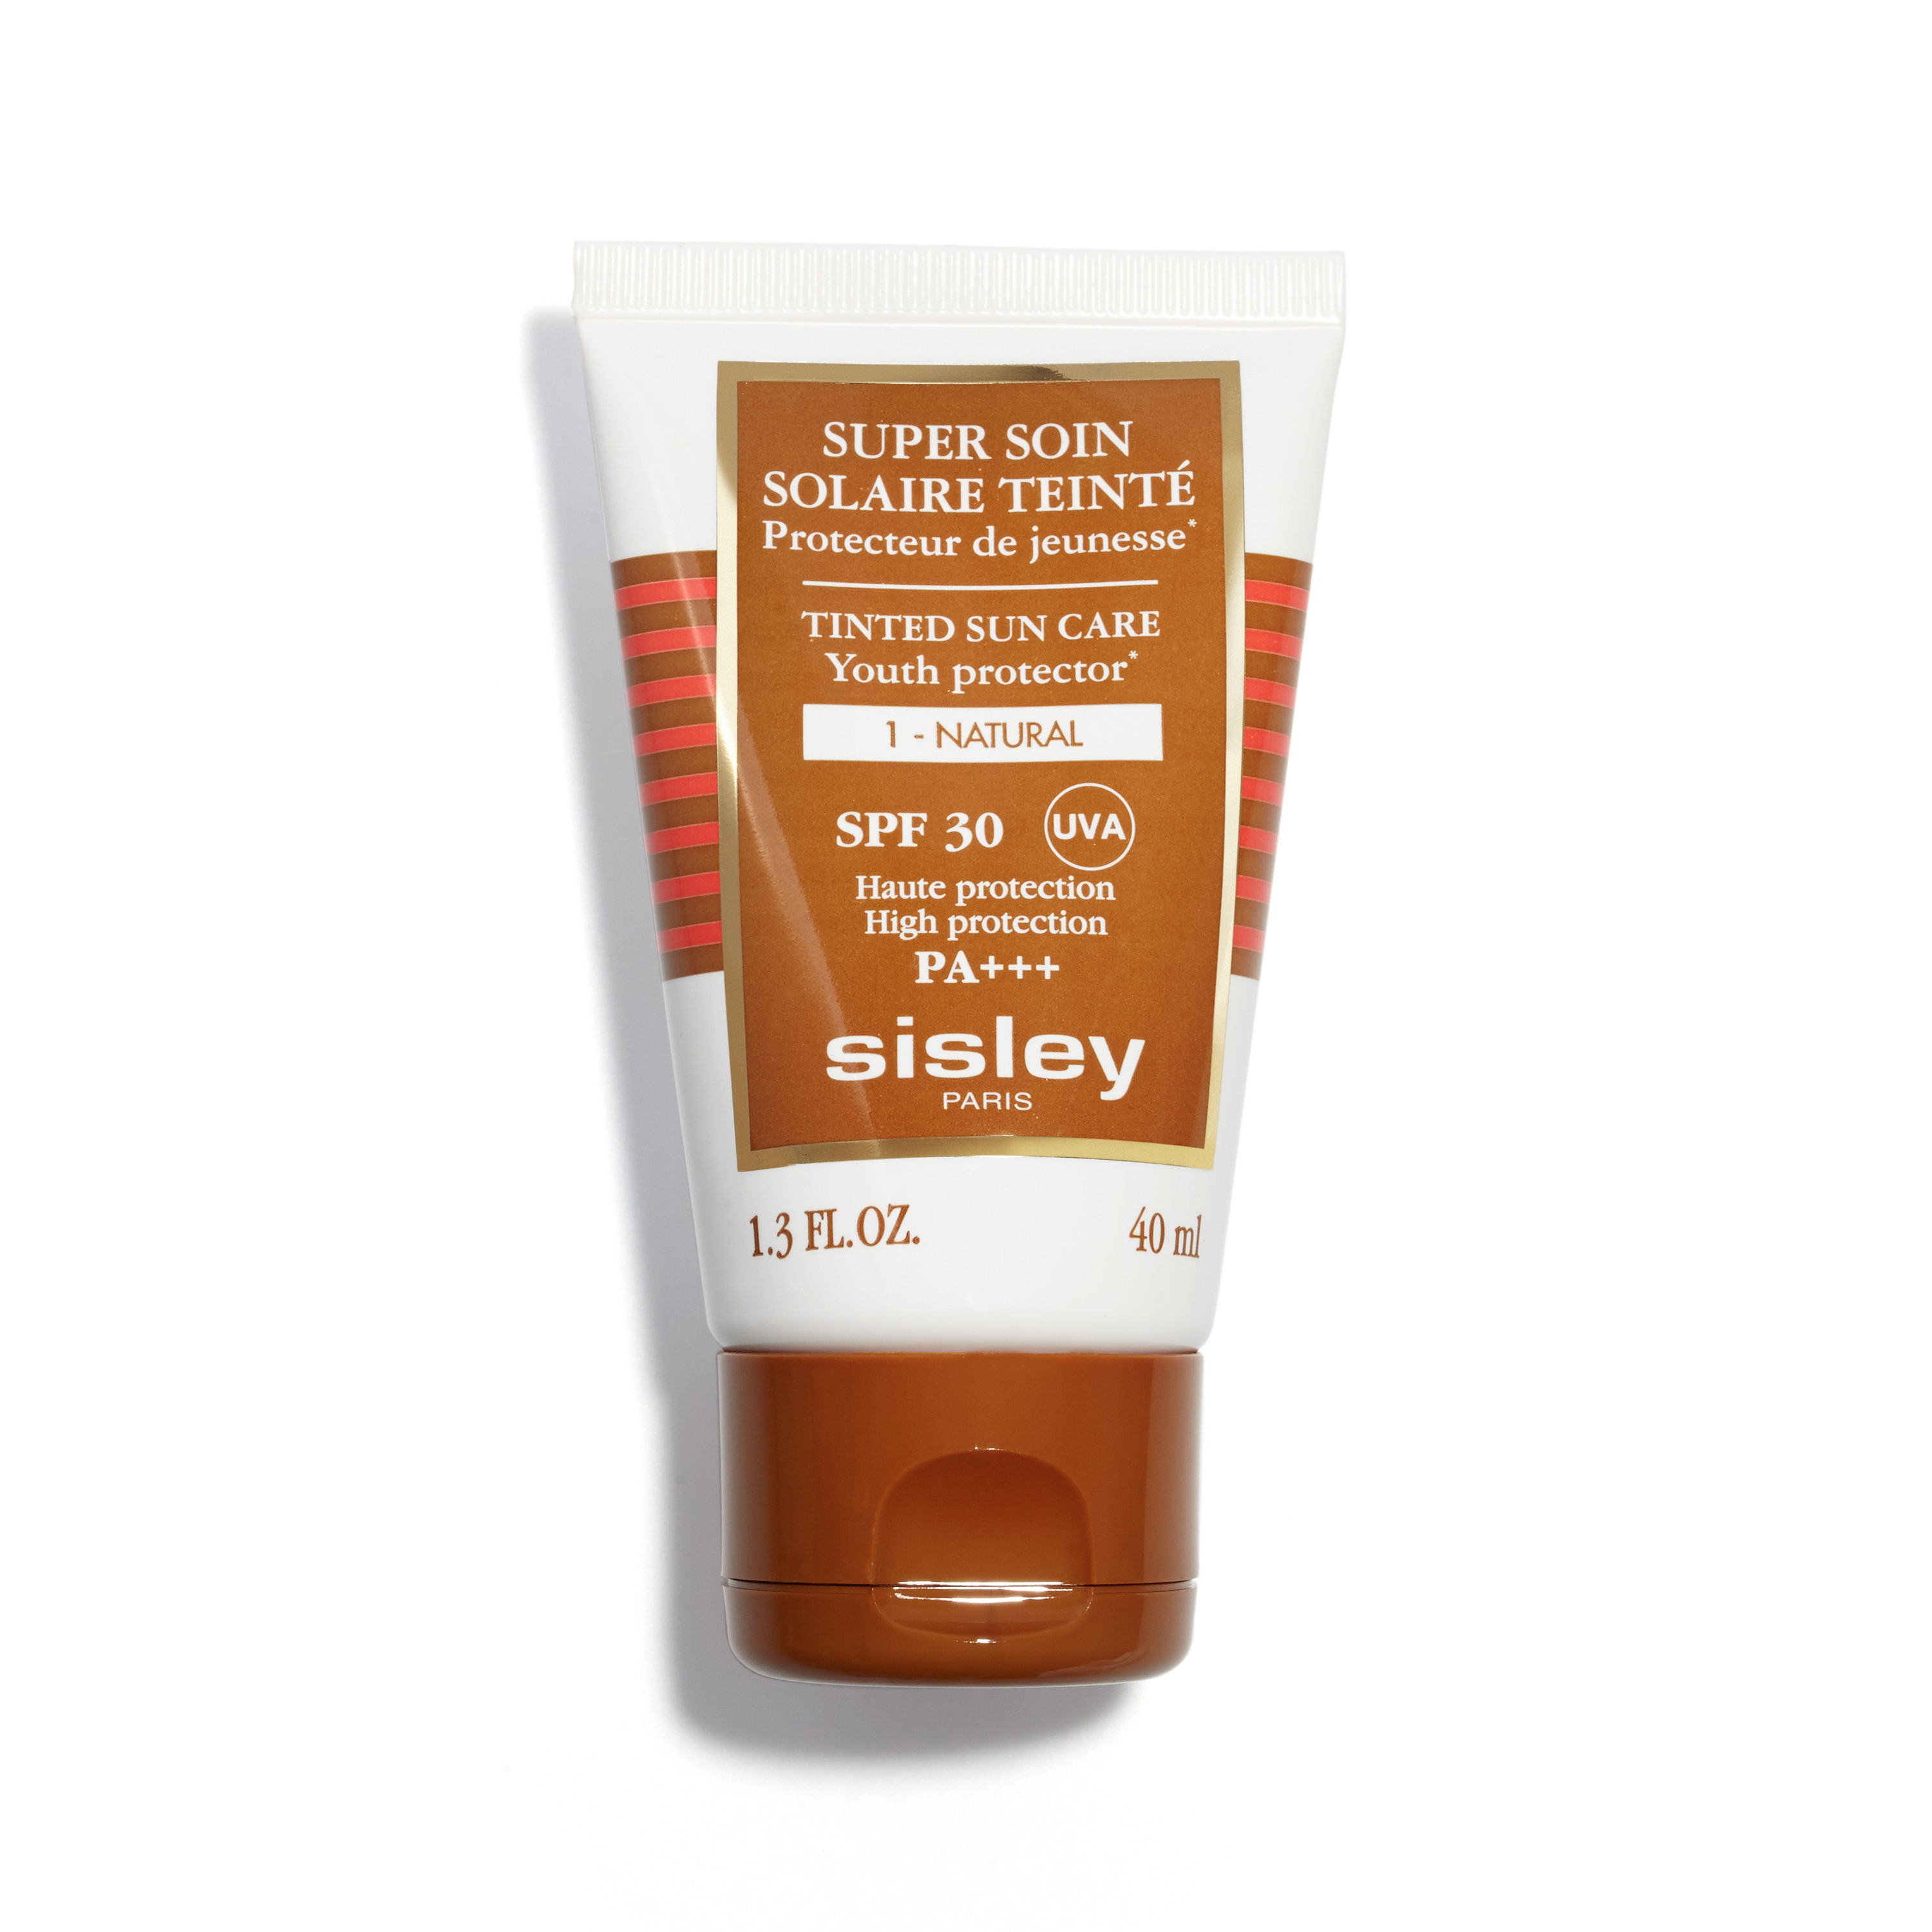 Super Soin Solaire Teinté SPF 30 N°1 Natural, N°1 Natural - Oro, large image number 0